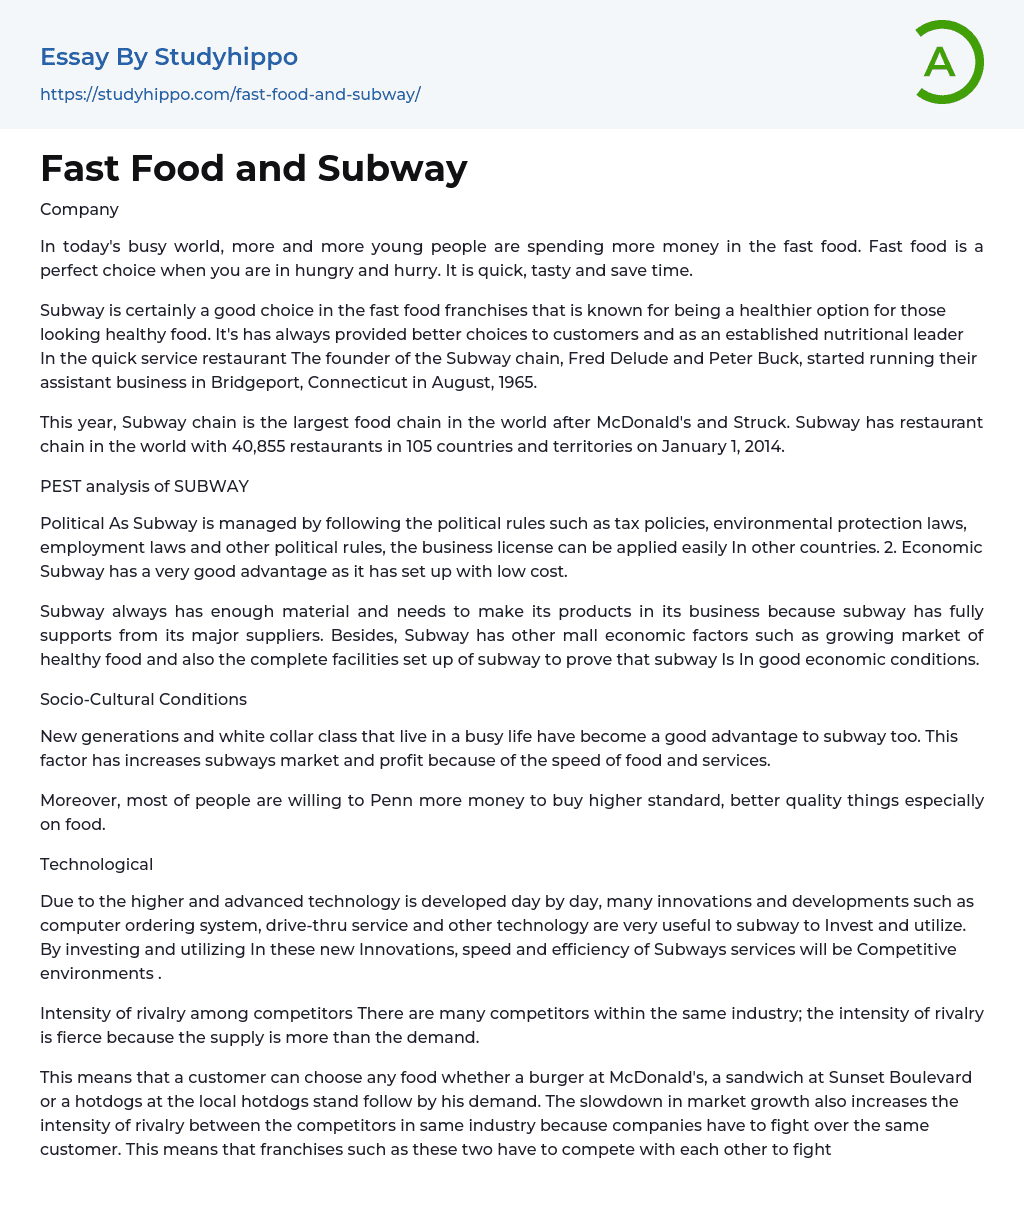 Fast Food and Subway Essay Example